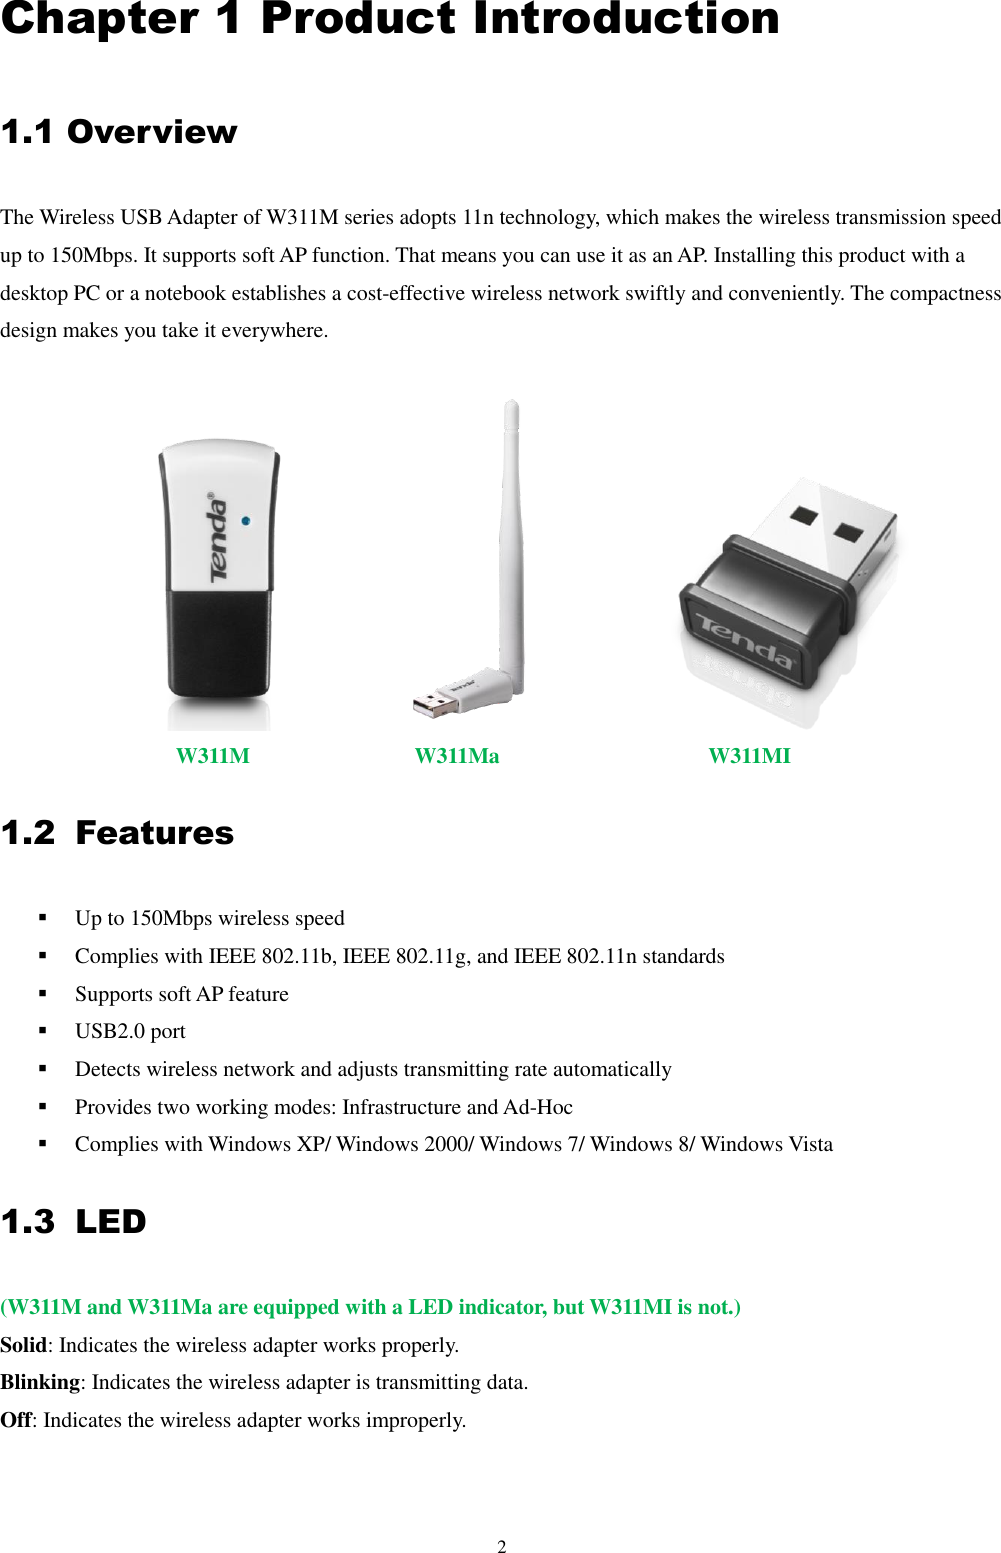 2  Chapter 1 Product Introduction 1.1 Overview   The Wireless USB Adapter of W311M series adopts 11n technology, which makes the wireless transmission speed up to 150Mbps. It supports soft AP function. That means you can use it as an AP. Installing this product with a desktop PC or a notebook establishes a cost-effective wireless network swiftly and conveniently. The compactness design makes you take it everywhere.              W311M               W311Ma                   W311MI 1.2 Features  Up to 150Mbps wireless speed  Complies with IEEE 802.11b, IEEE 802.11g, and IEEE 802.11n standards  Supports soft AP feature  USB2.0 port  Detects wireless network and adjusts transmitting rate automatically                                                                                                                Provides two working modes: Infrastructure and Ad-Hoc  Complies with Windows XP/ Windows 2000/ Windows 7/ Windows 8/ Windows Vista 1.3 LED (W311M and W311Ma are equipped with a LED indicator, but W311MI is not.) Solid: Indicates the wireless adapter works properly. Blinking: Indicates the wireless adapter is transmitting data. Off: Indicates the wireless adapter works improperly. 